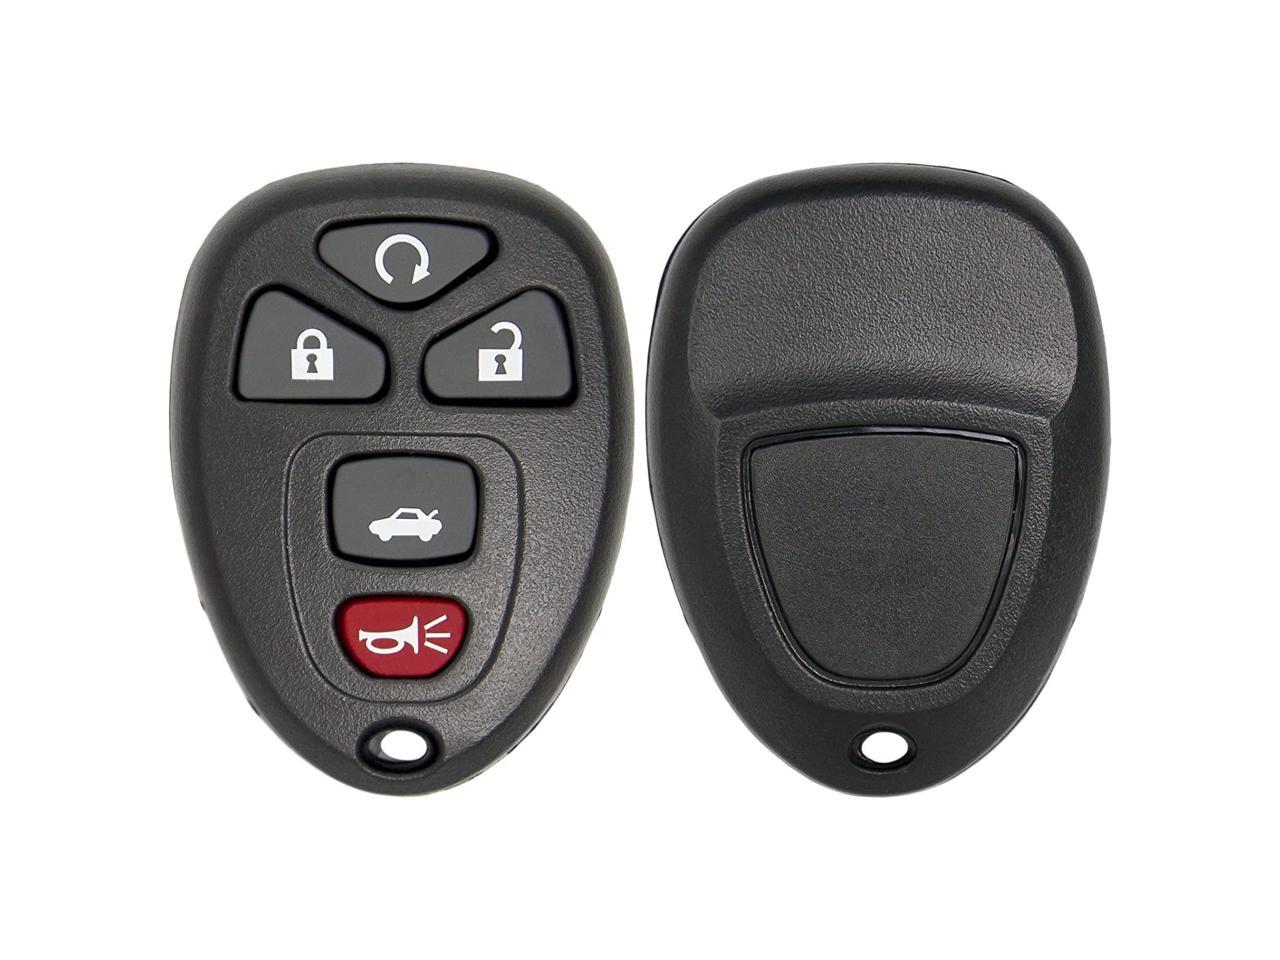 KeylessOption Replacement 6 Button Keyless Entry Remote Key Fob Shell Case With Trunk Release